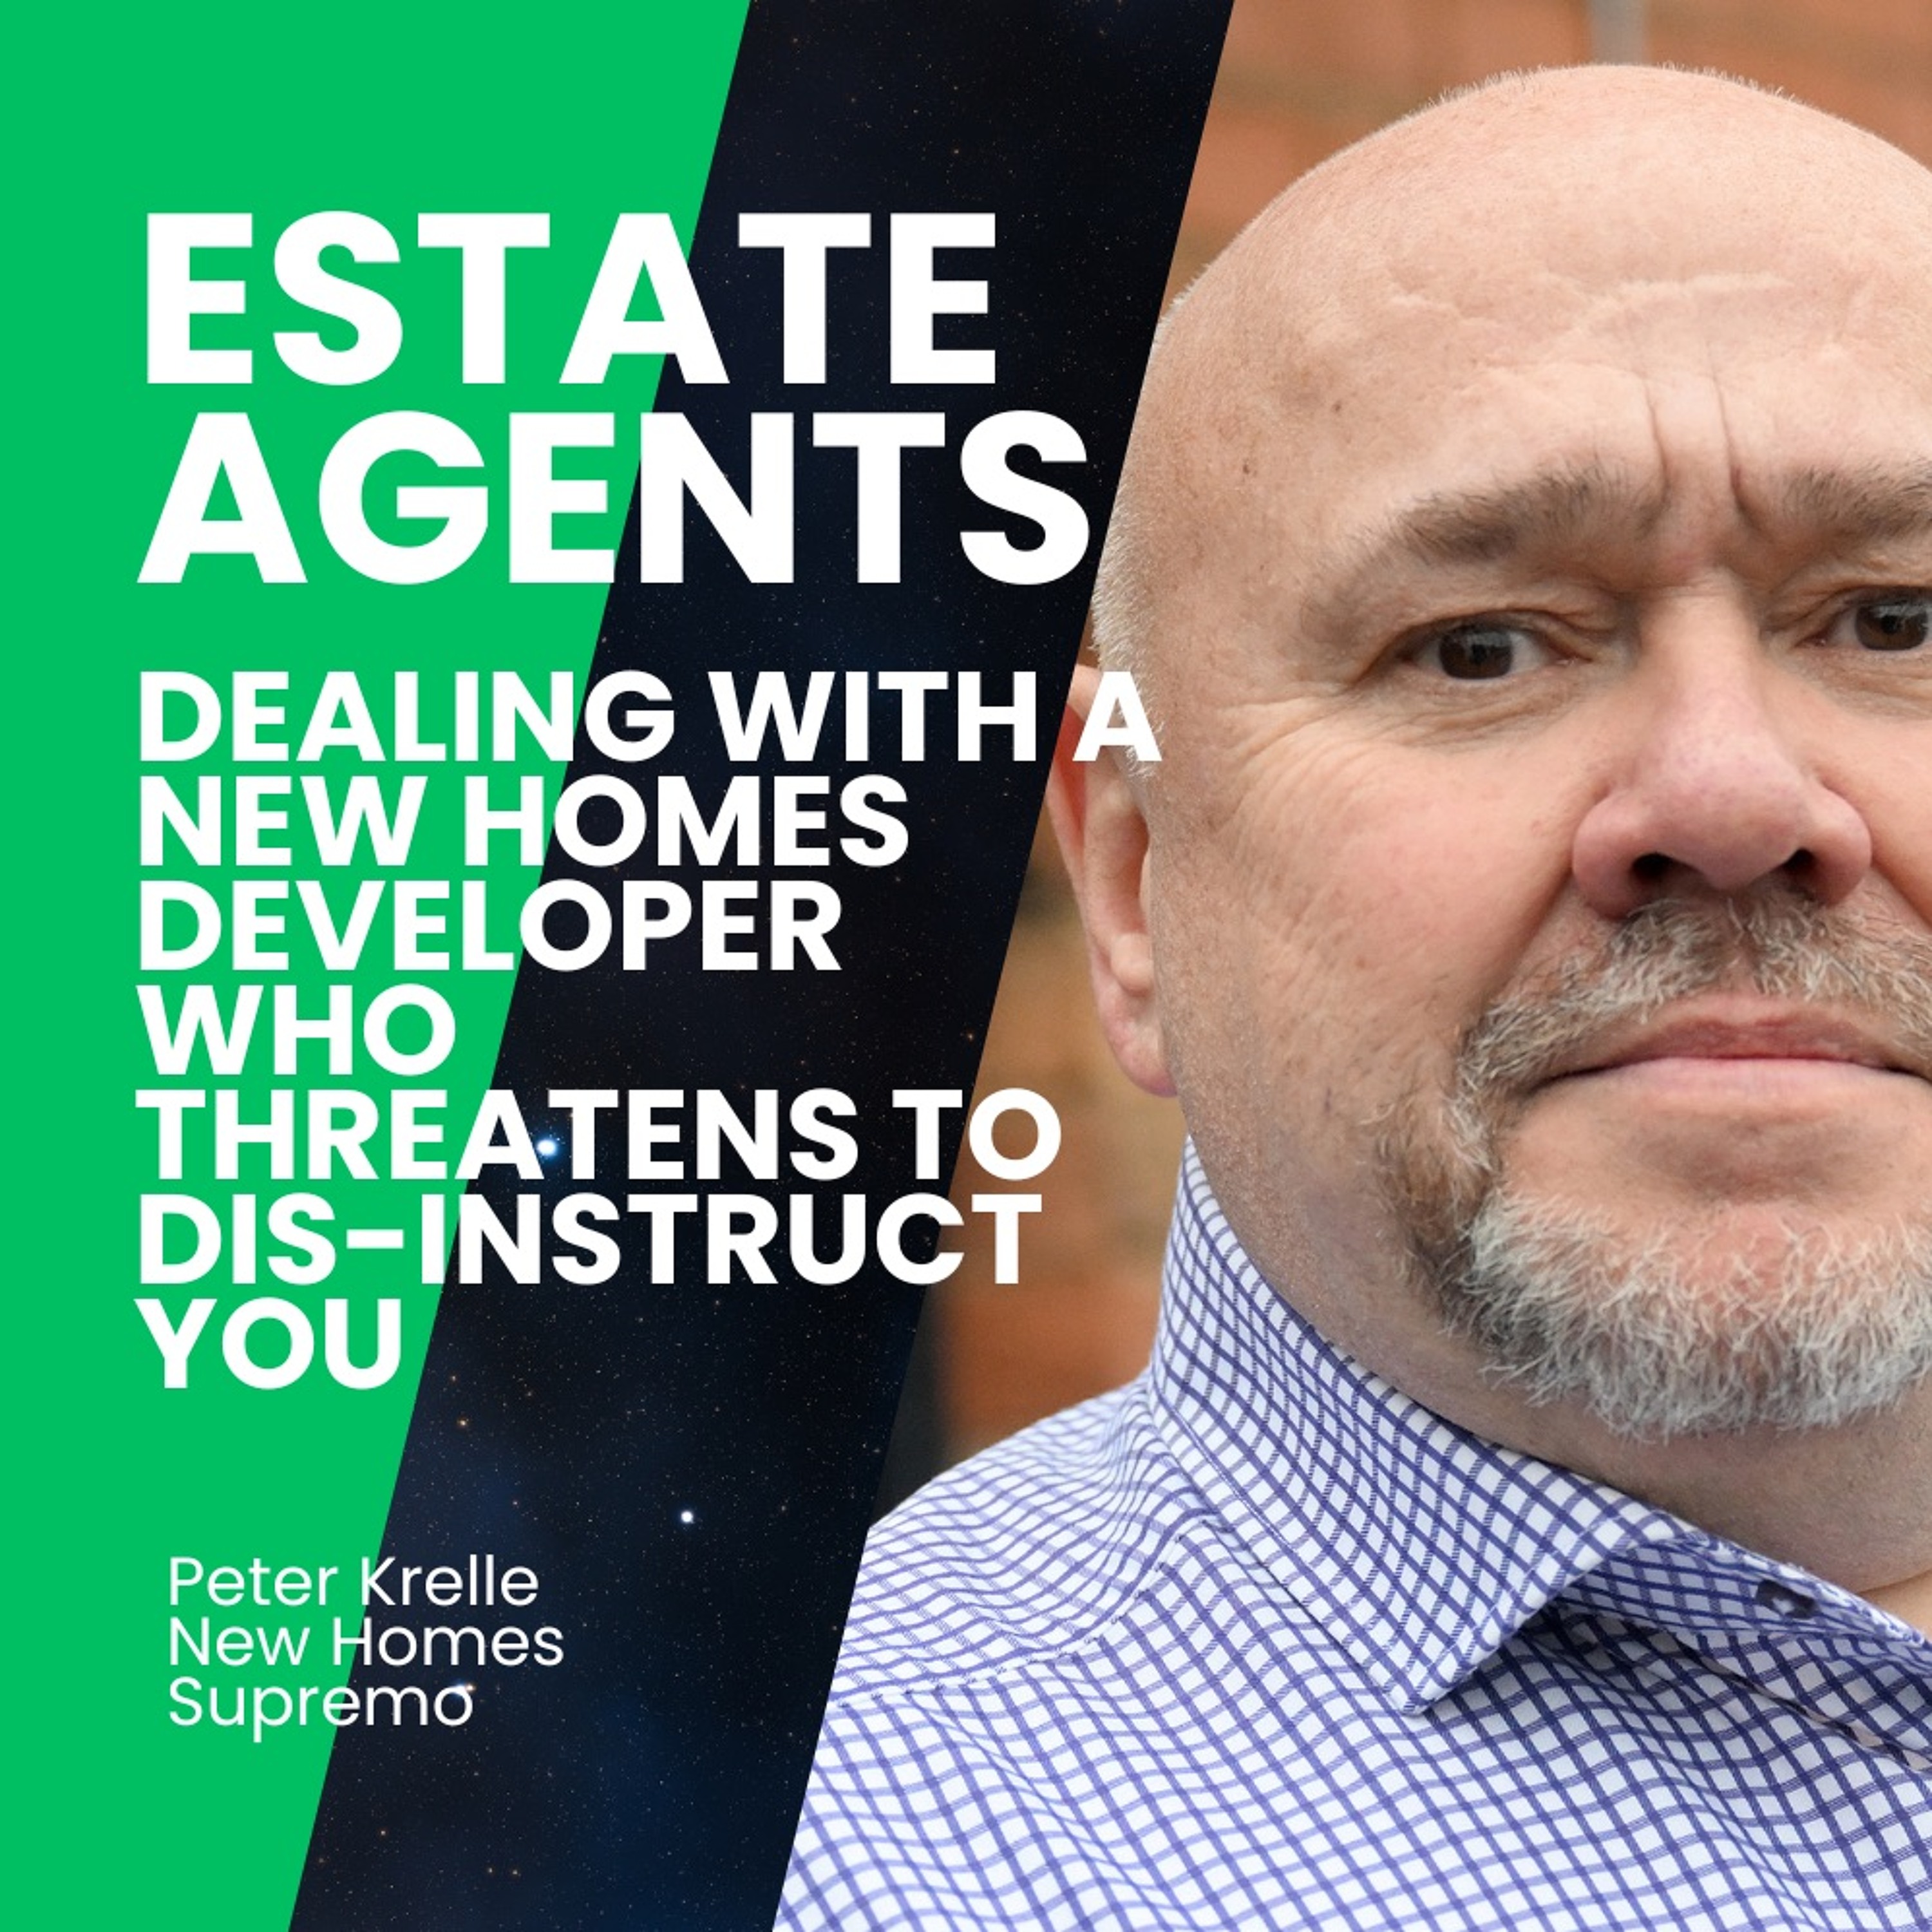 Estate Agents -  Dealing With A New Homes Developer Who Threatens To Dis Instruct You Ep. 1851